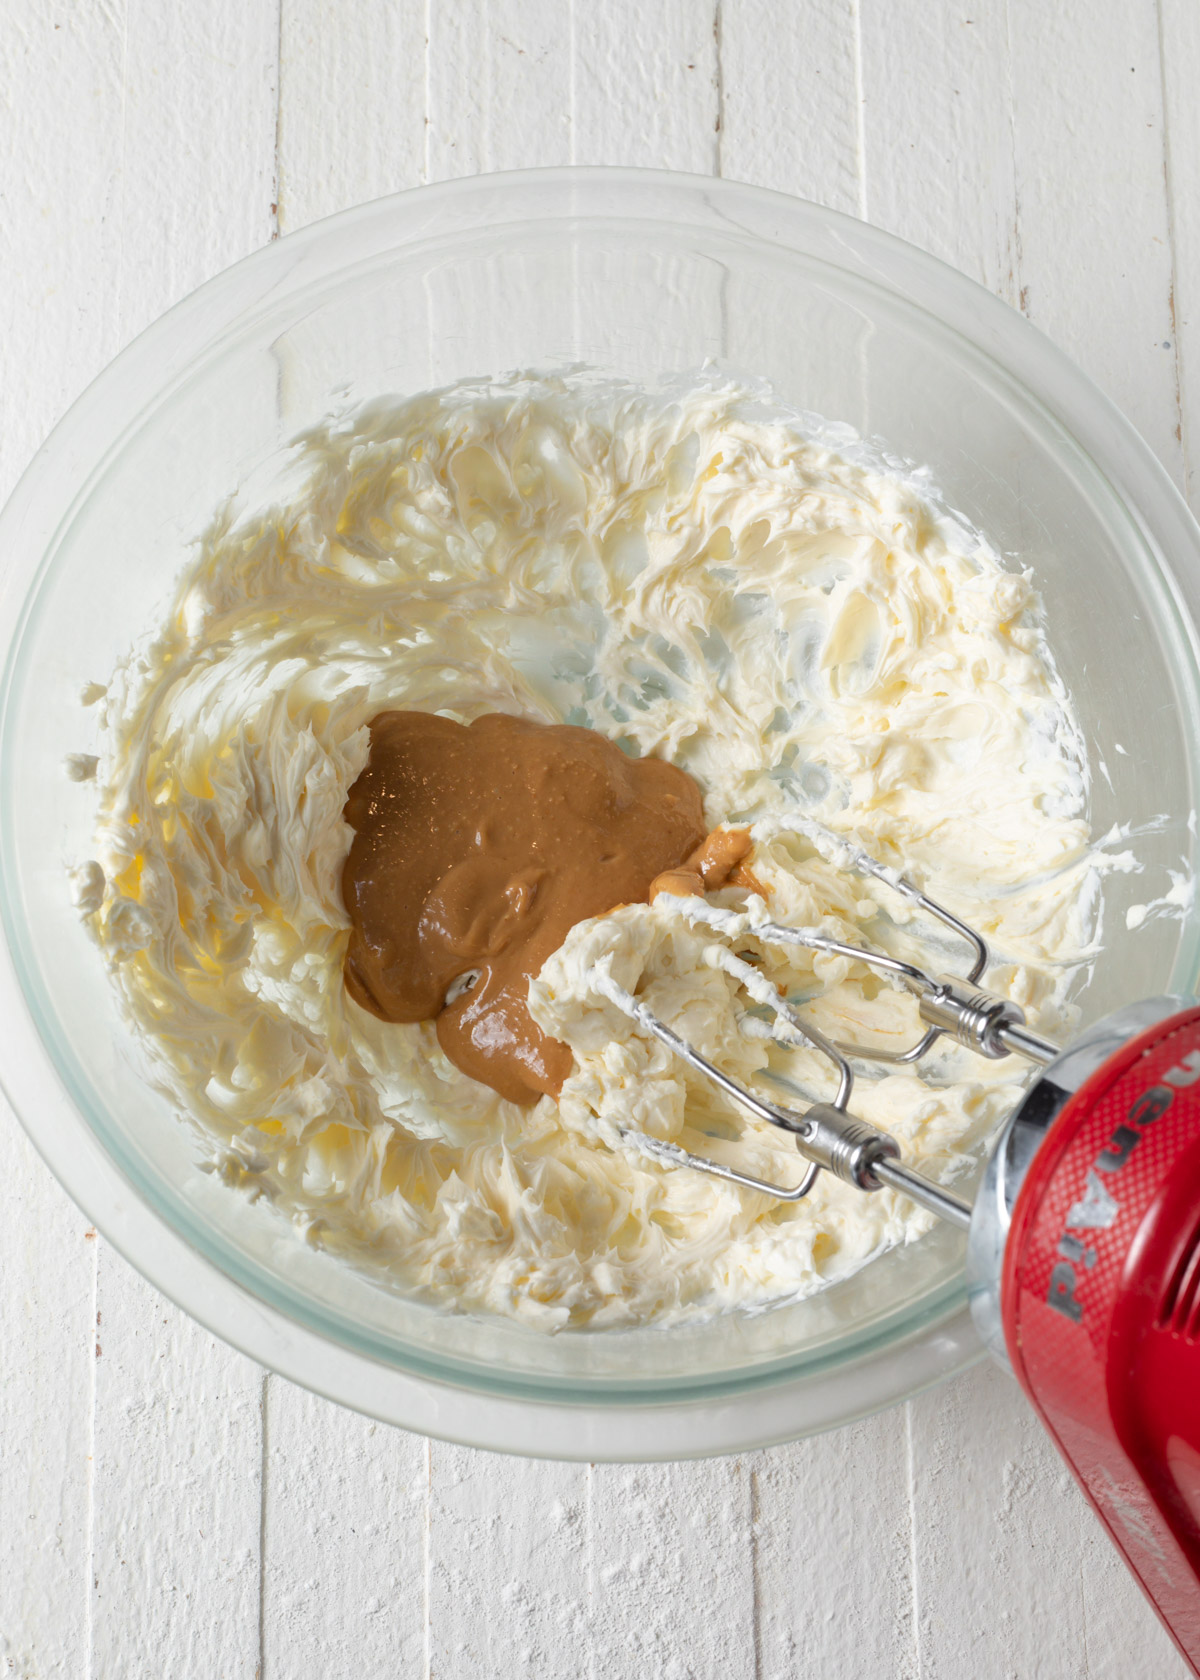 Adding peanut butter to cream cheese frosting